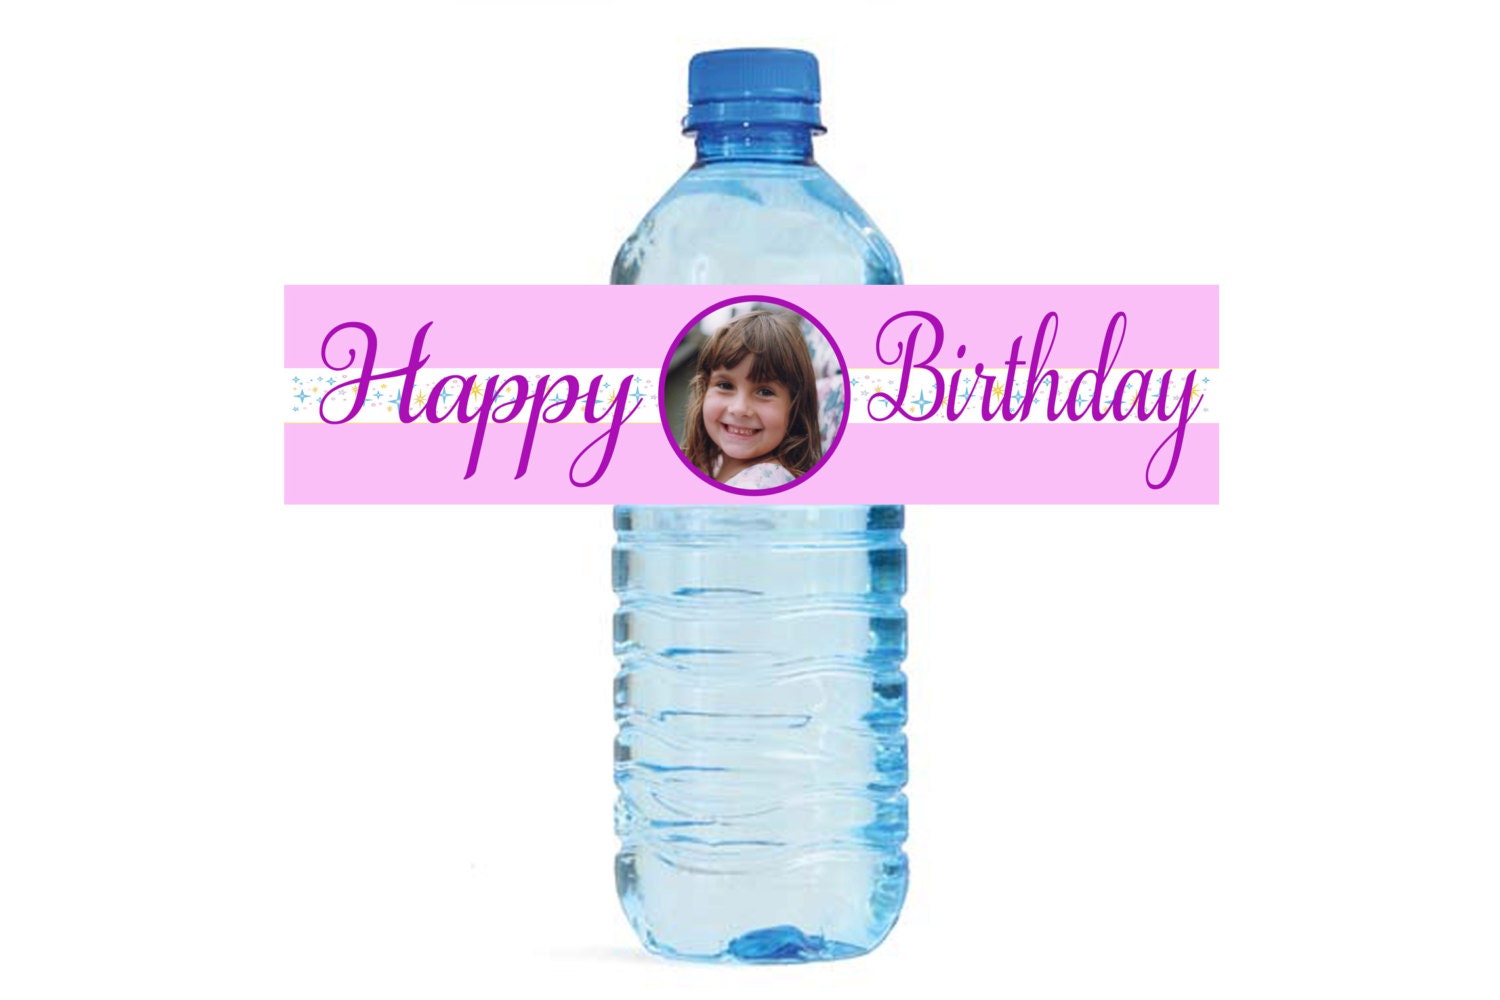 personalized birthday water bottle labels printable birthday